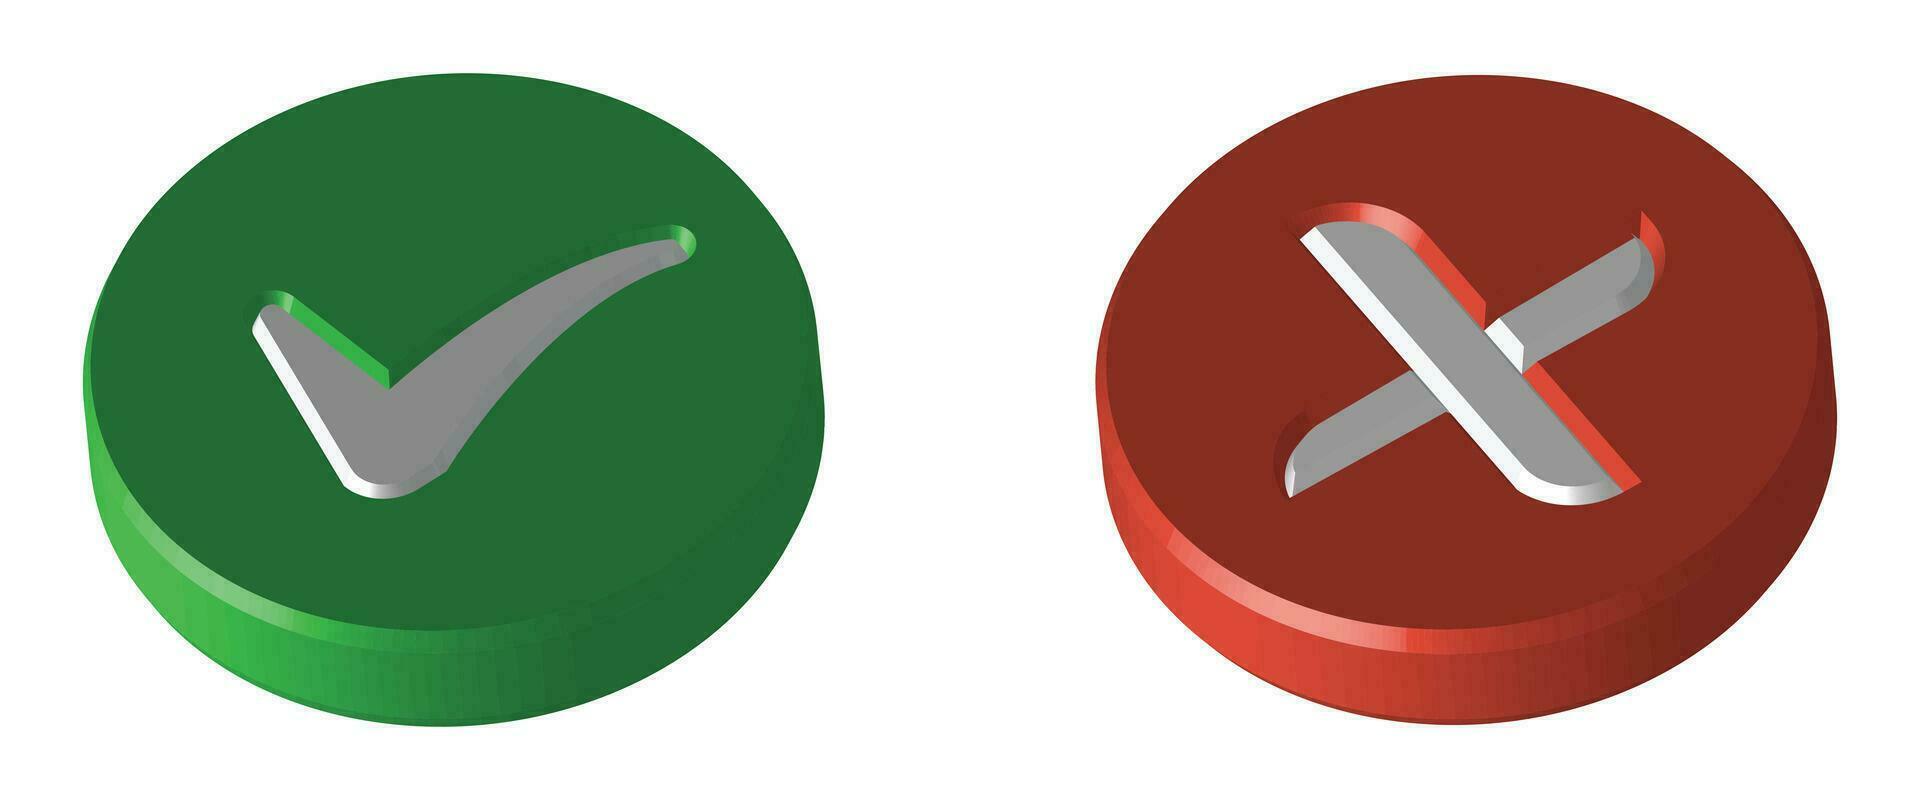 Realistic 3D Green Right Check Mark Icon, Wrong Checkmark Icon, Glossy And Shiny Tickmark Icon And Cross Mark Icon, Green And Red Realistic Checkmark With Correct Wrong Or X Mark Vector Illustration